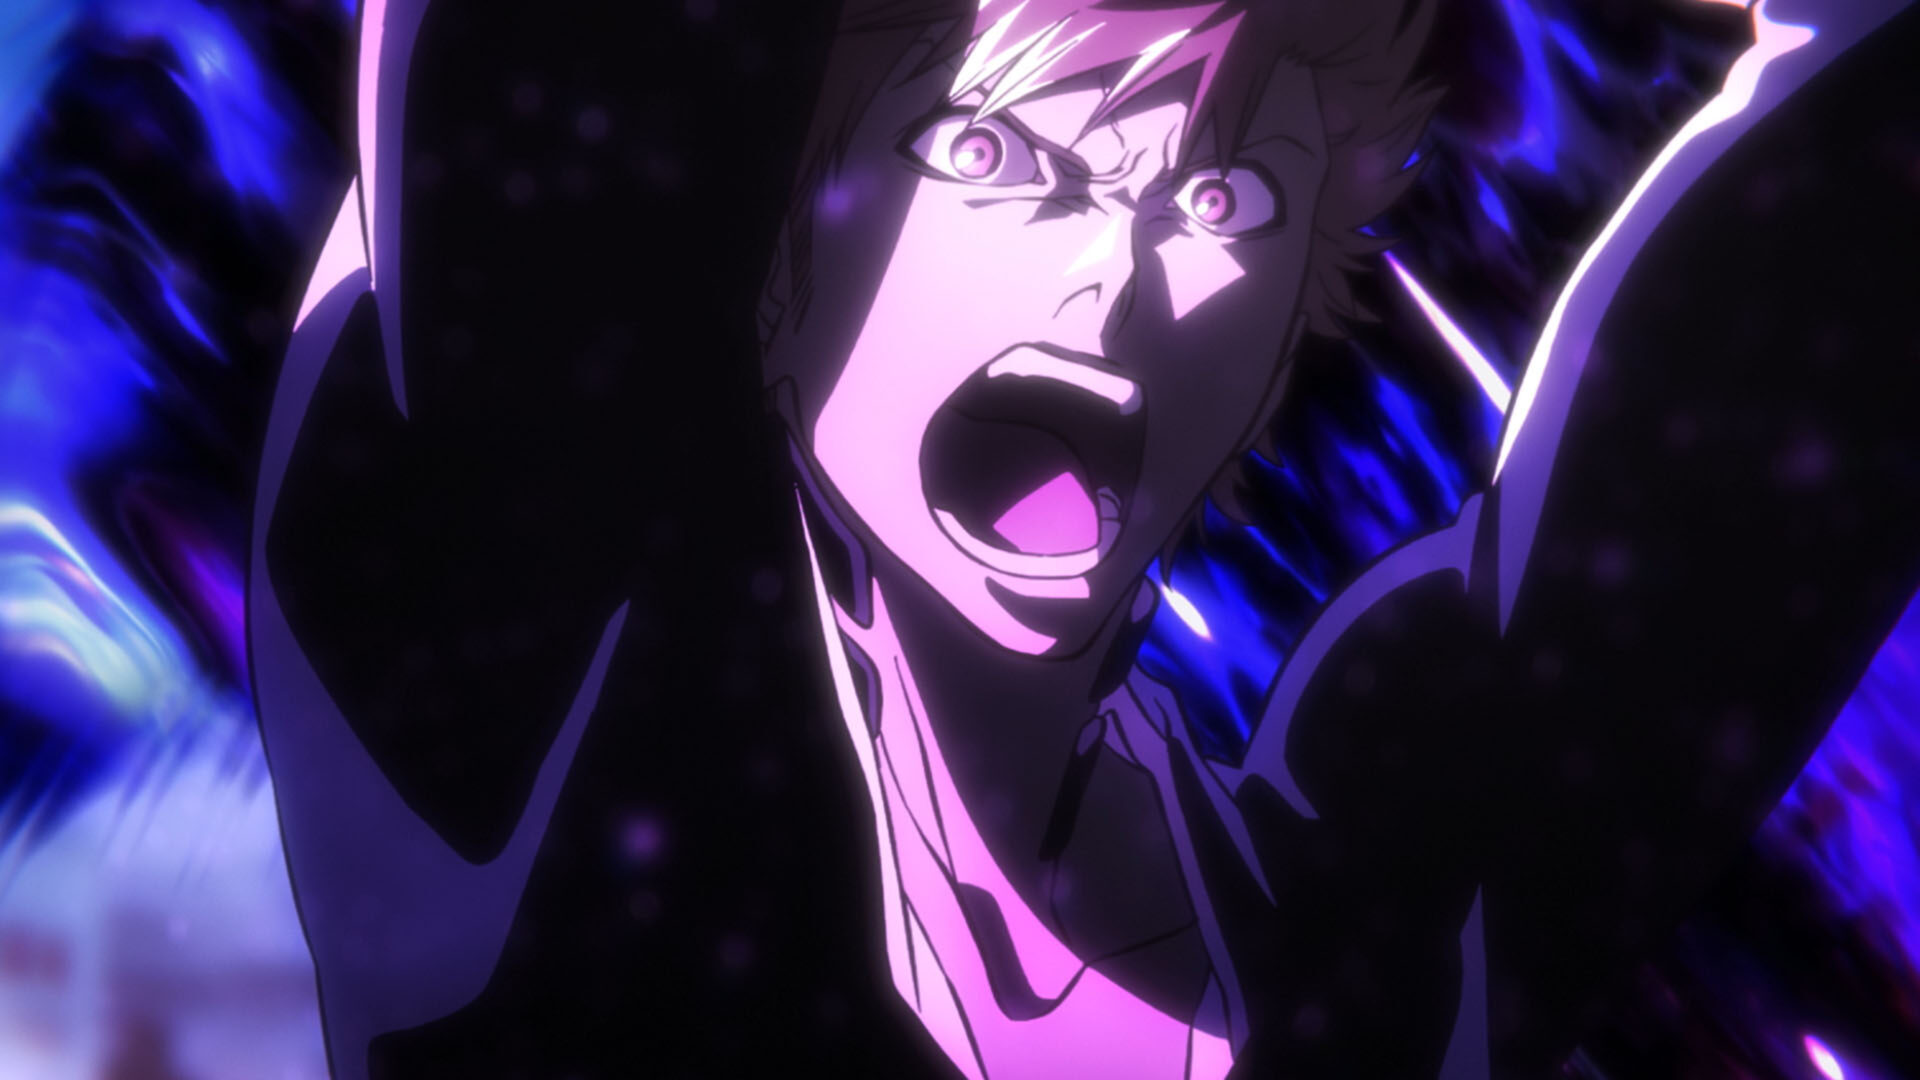 Bleach: Thousand-Year Blood War drops epic trailer at Anime Expo - Dexerto